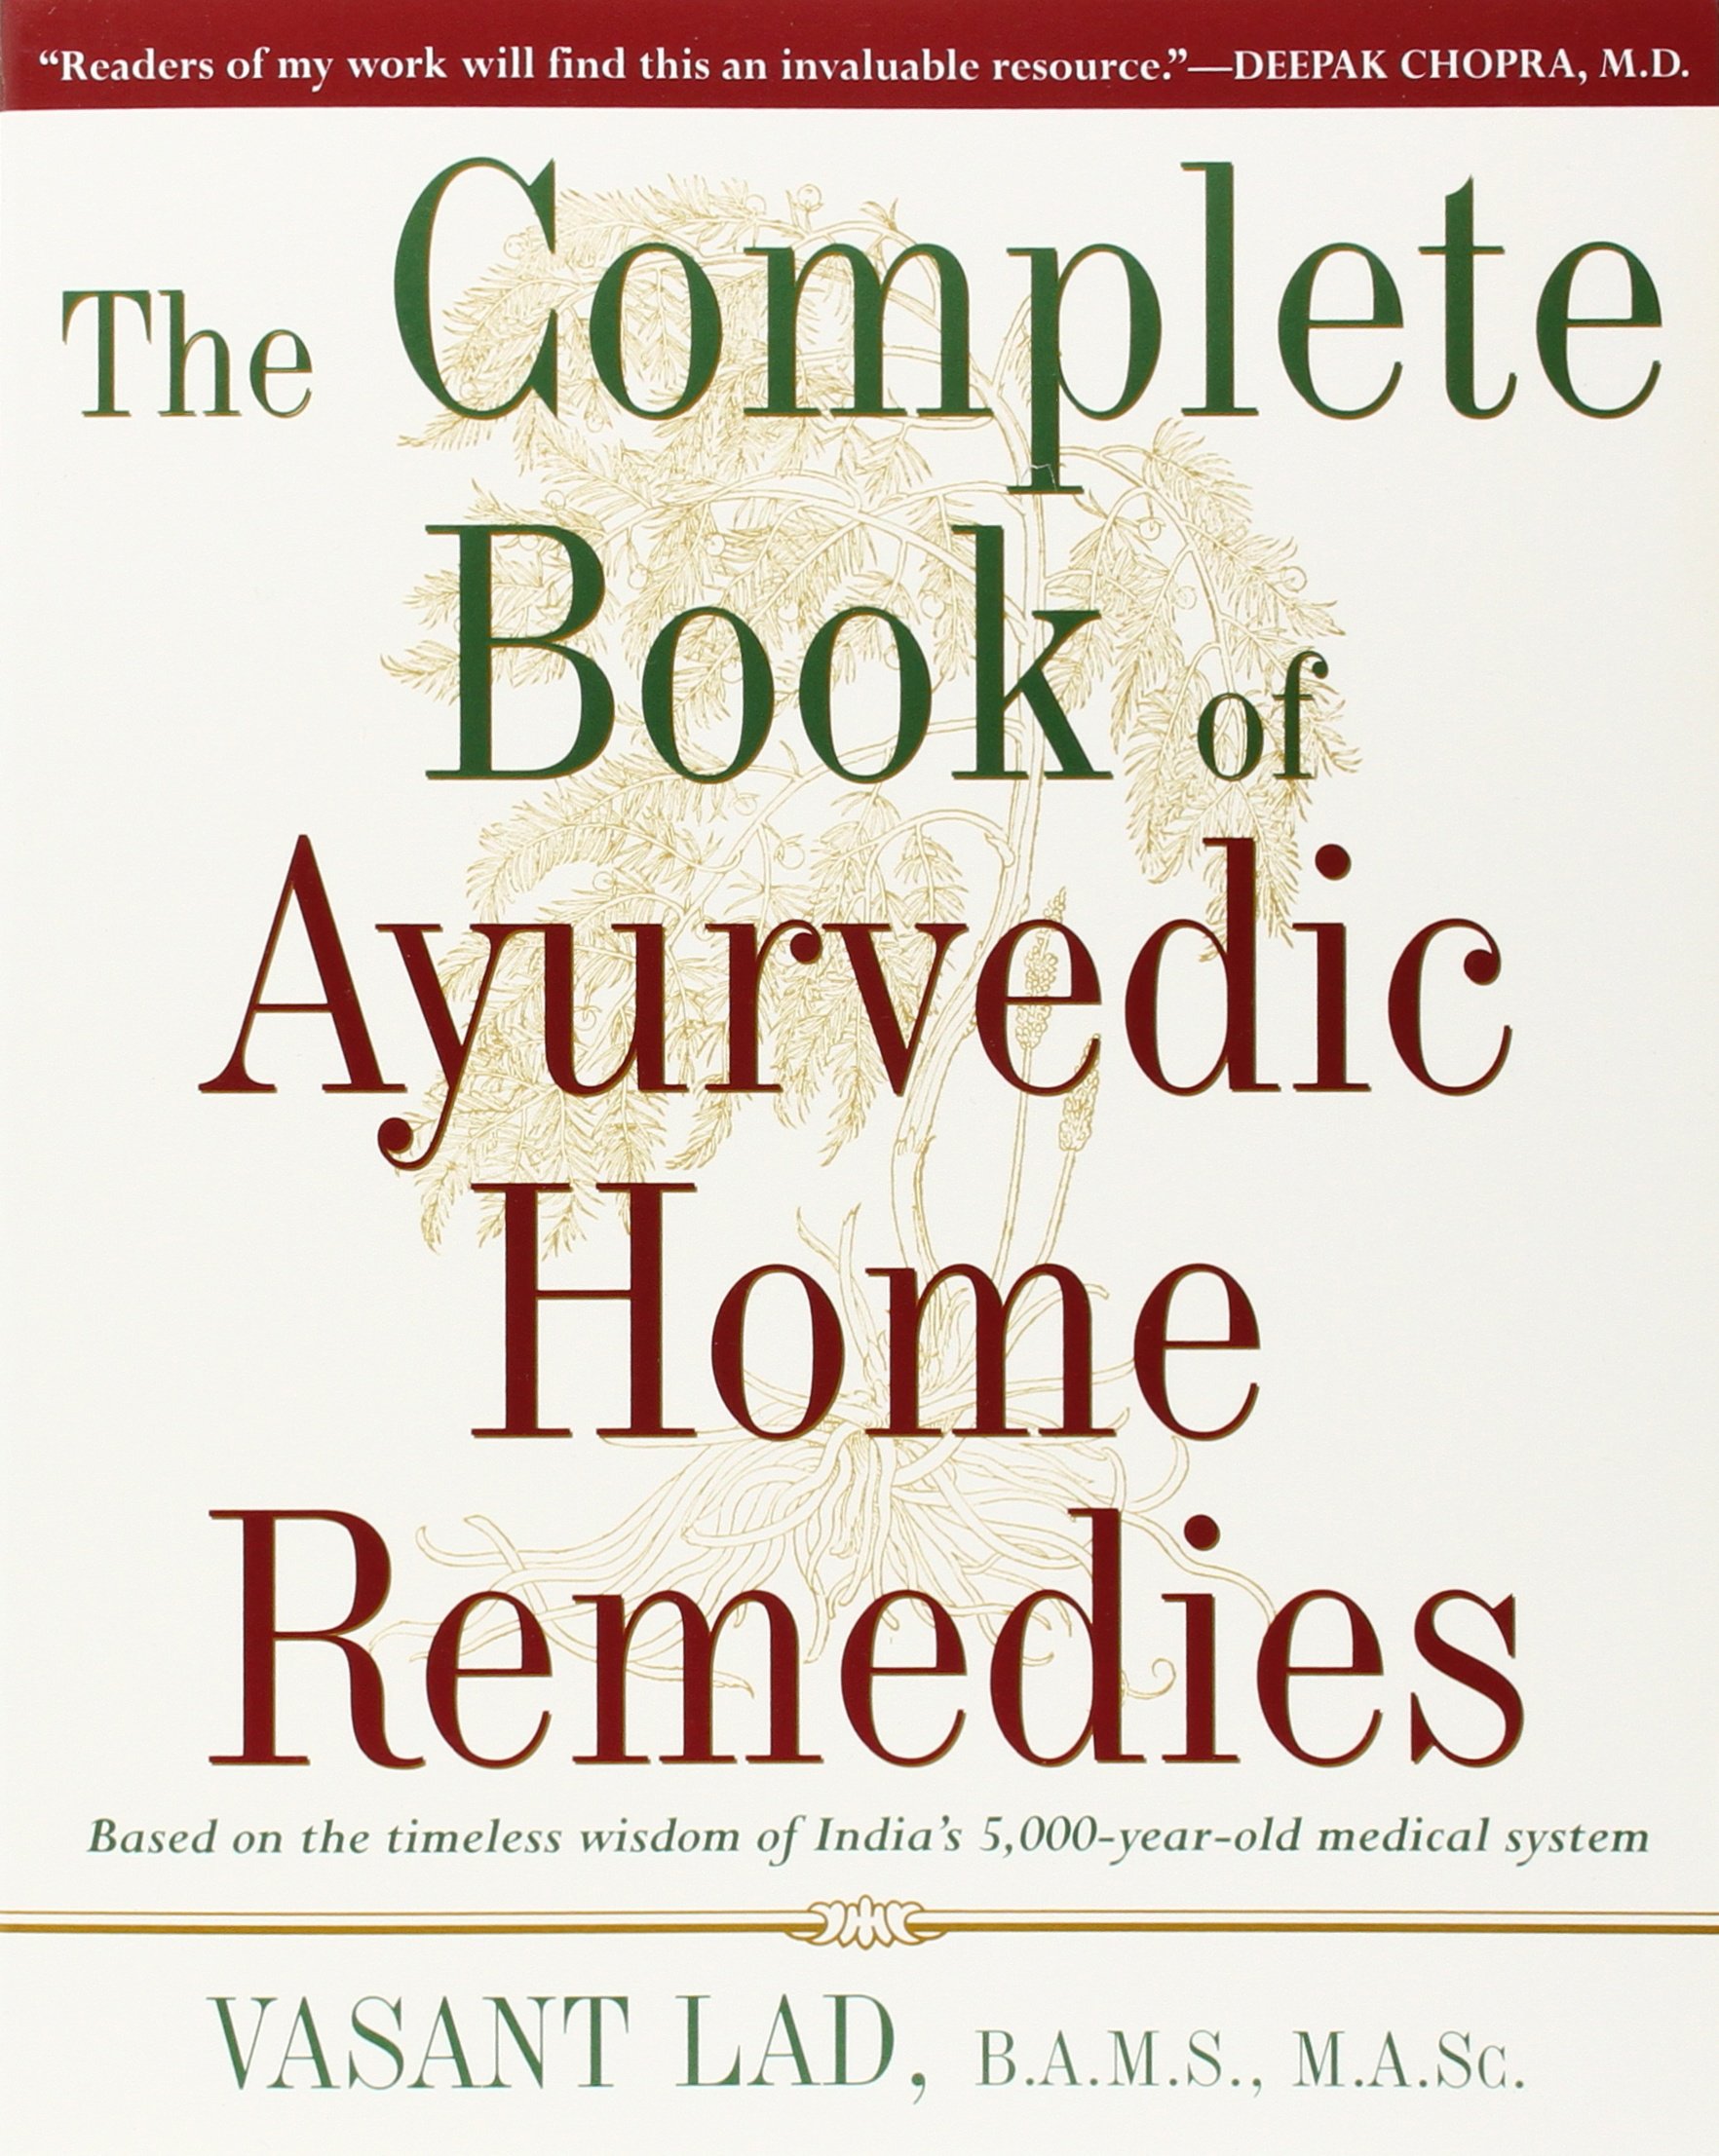 Complete Book of Ayurvedic Home Remedies $14 